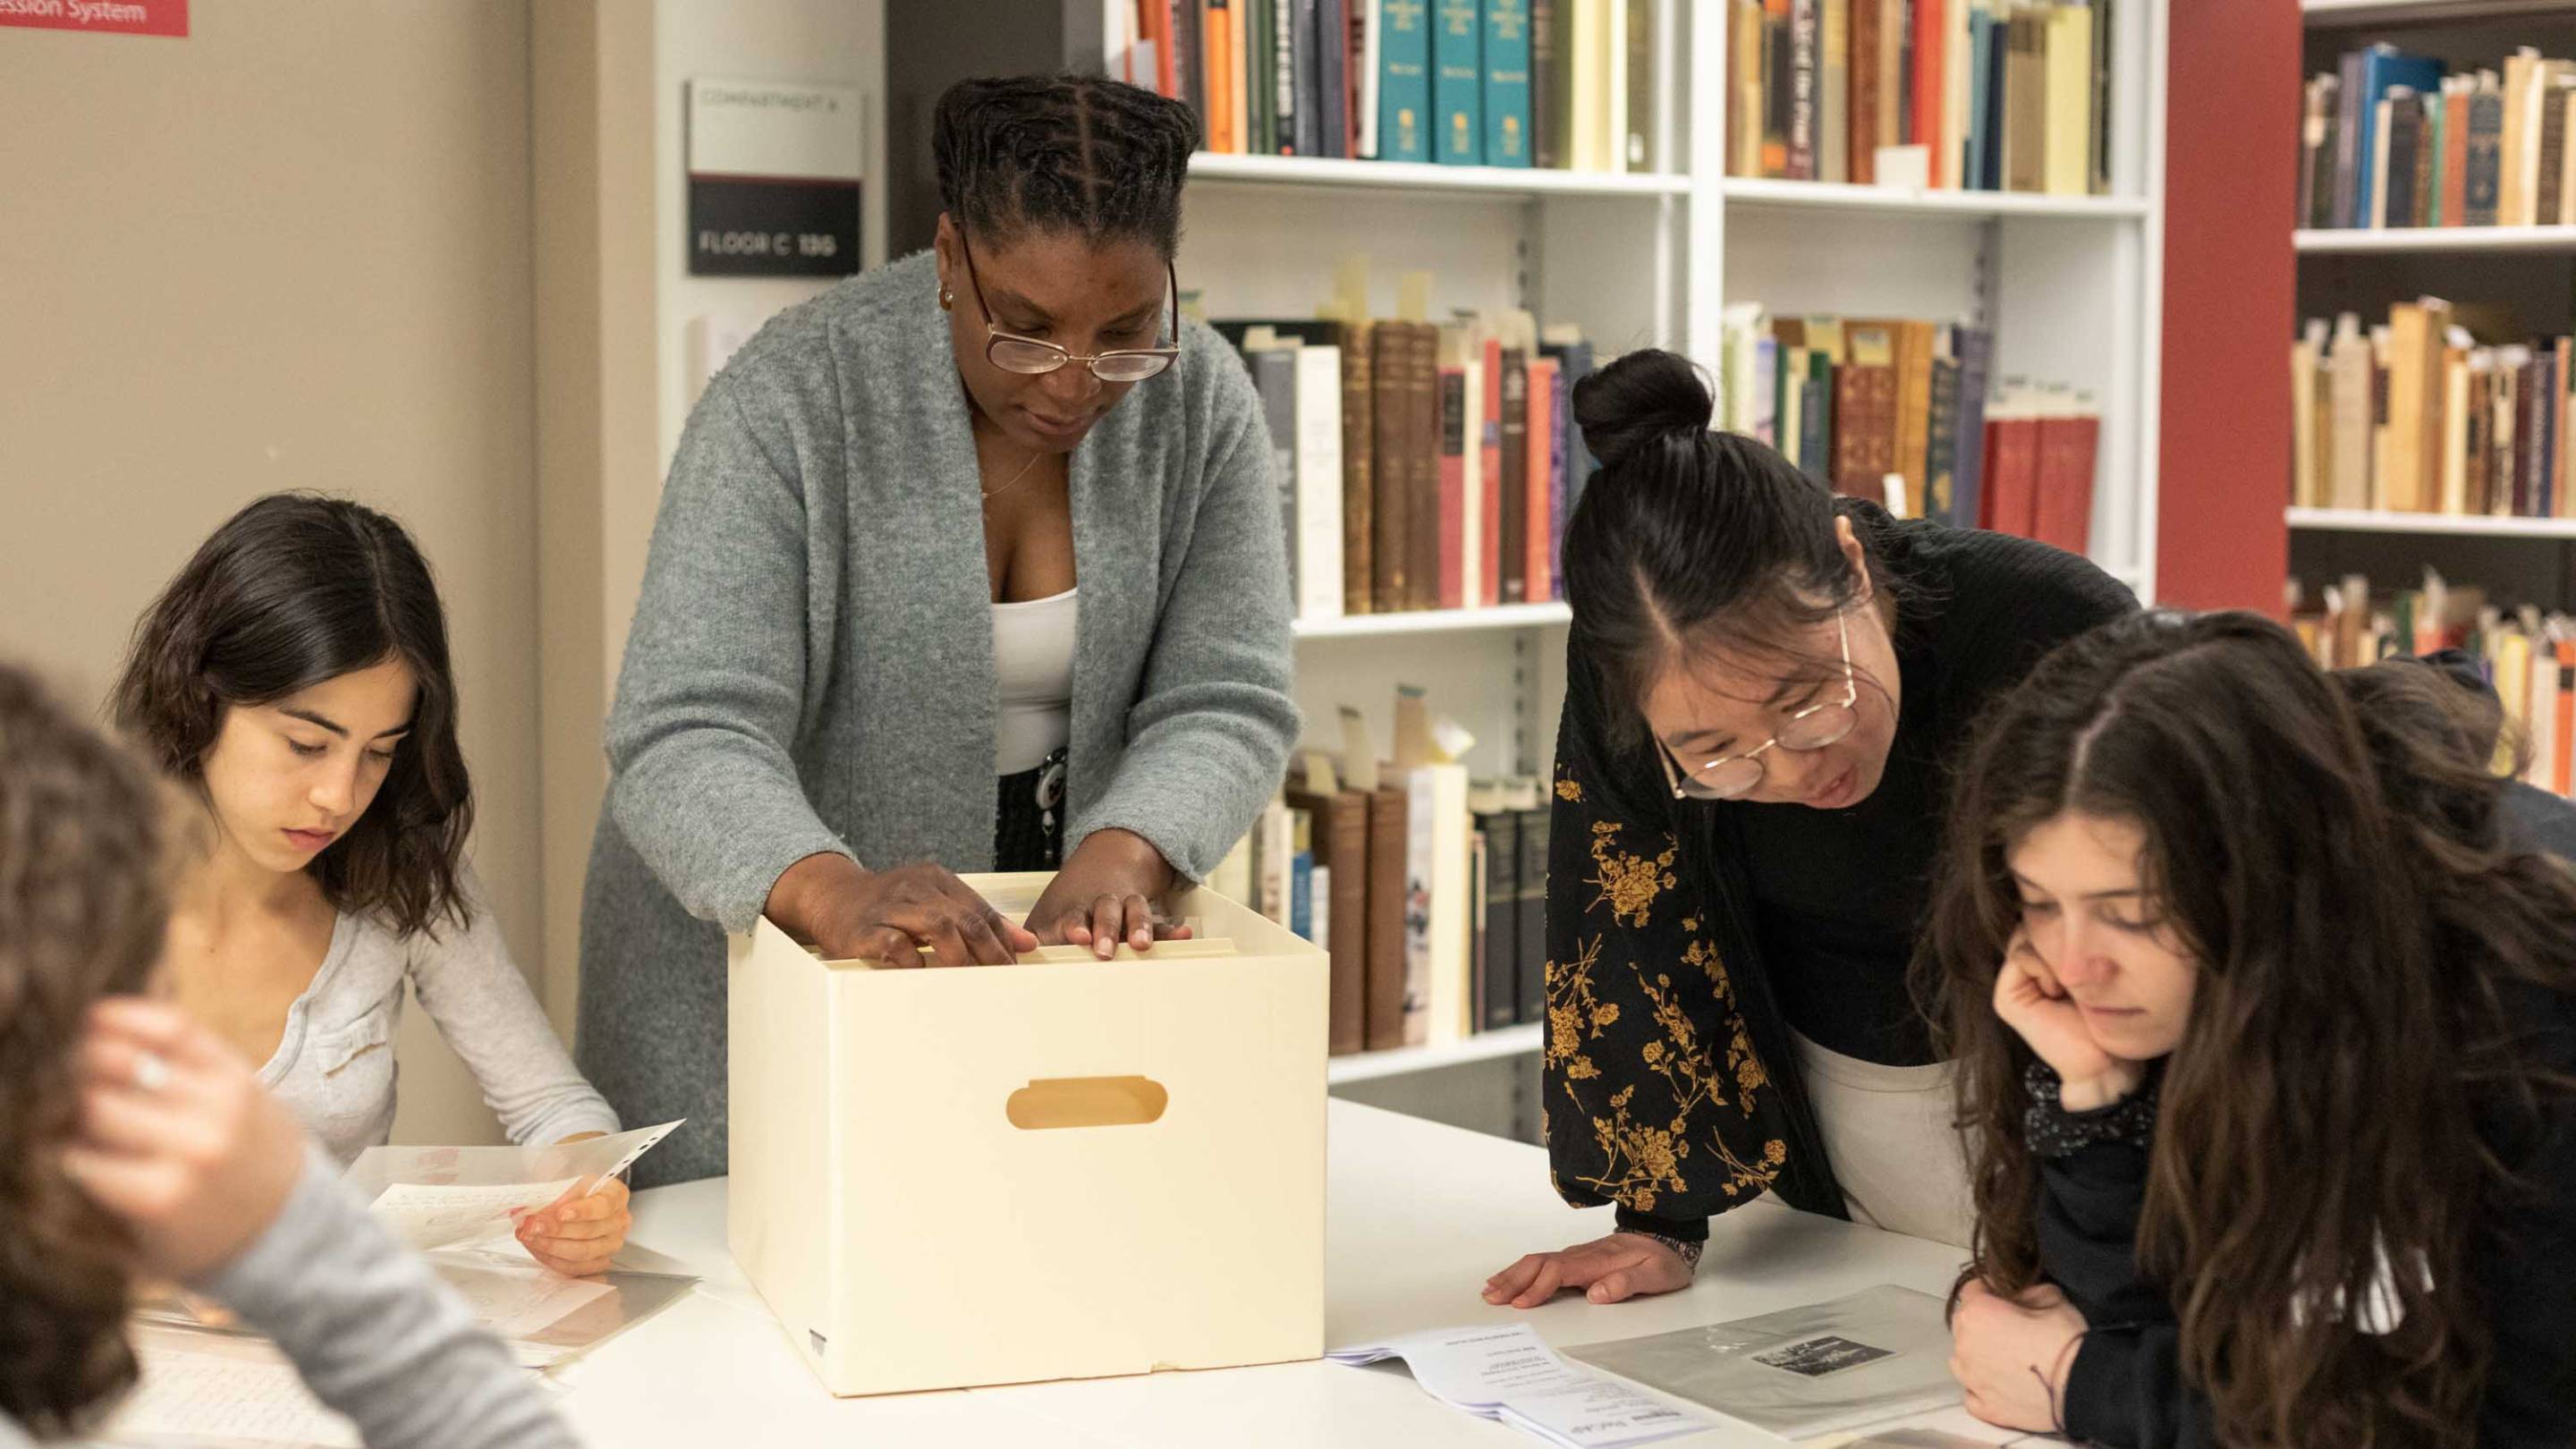 Students engage in archival research with the René Char Papers at Princeton University Library.